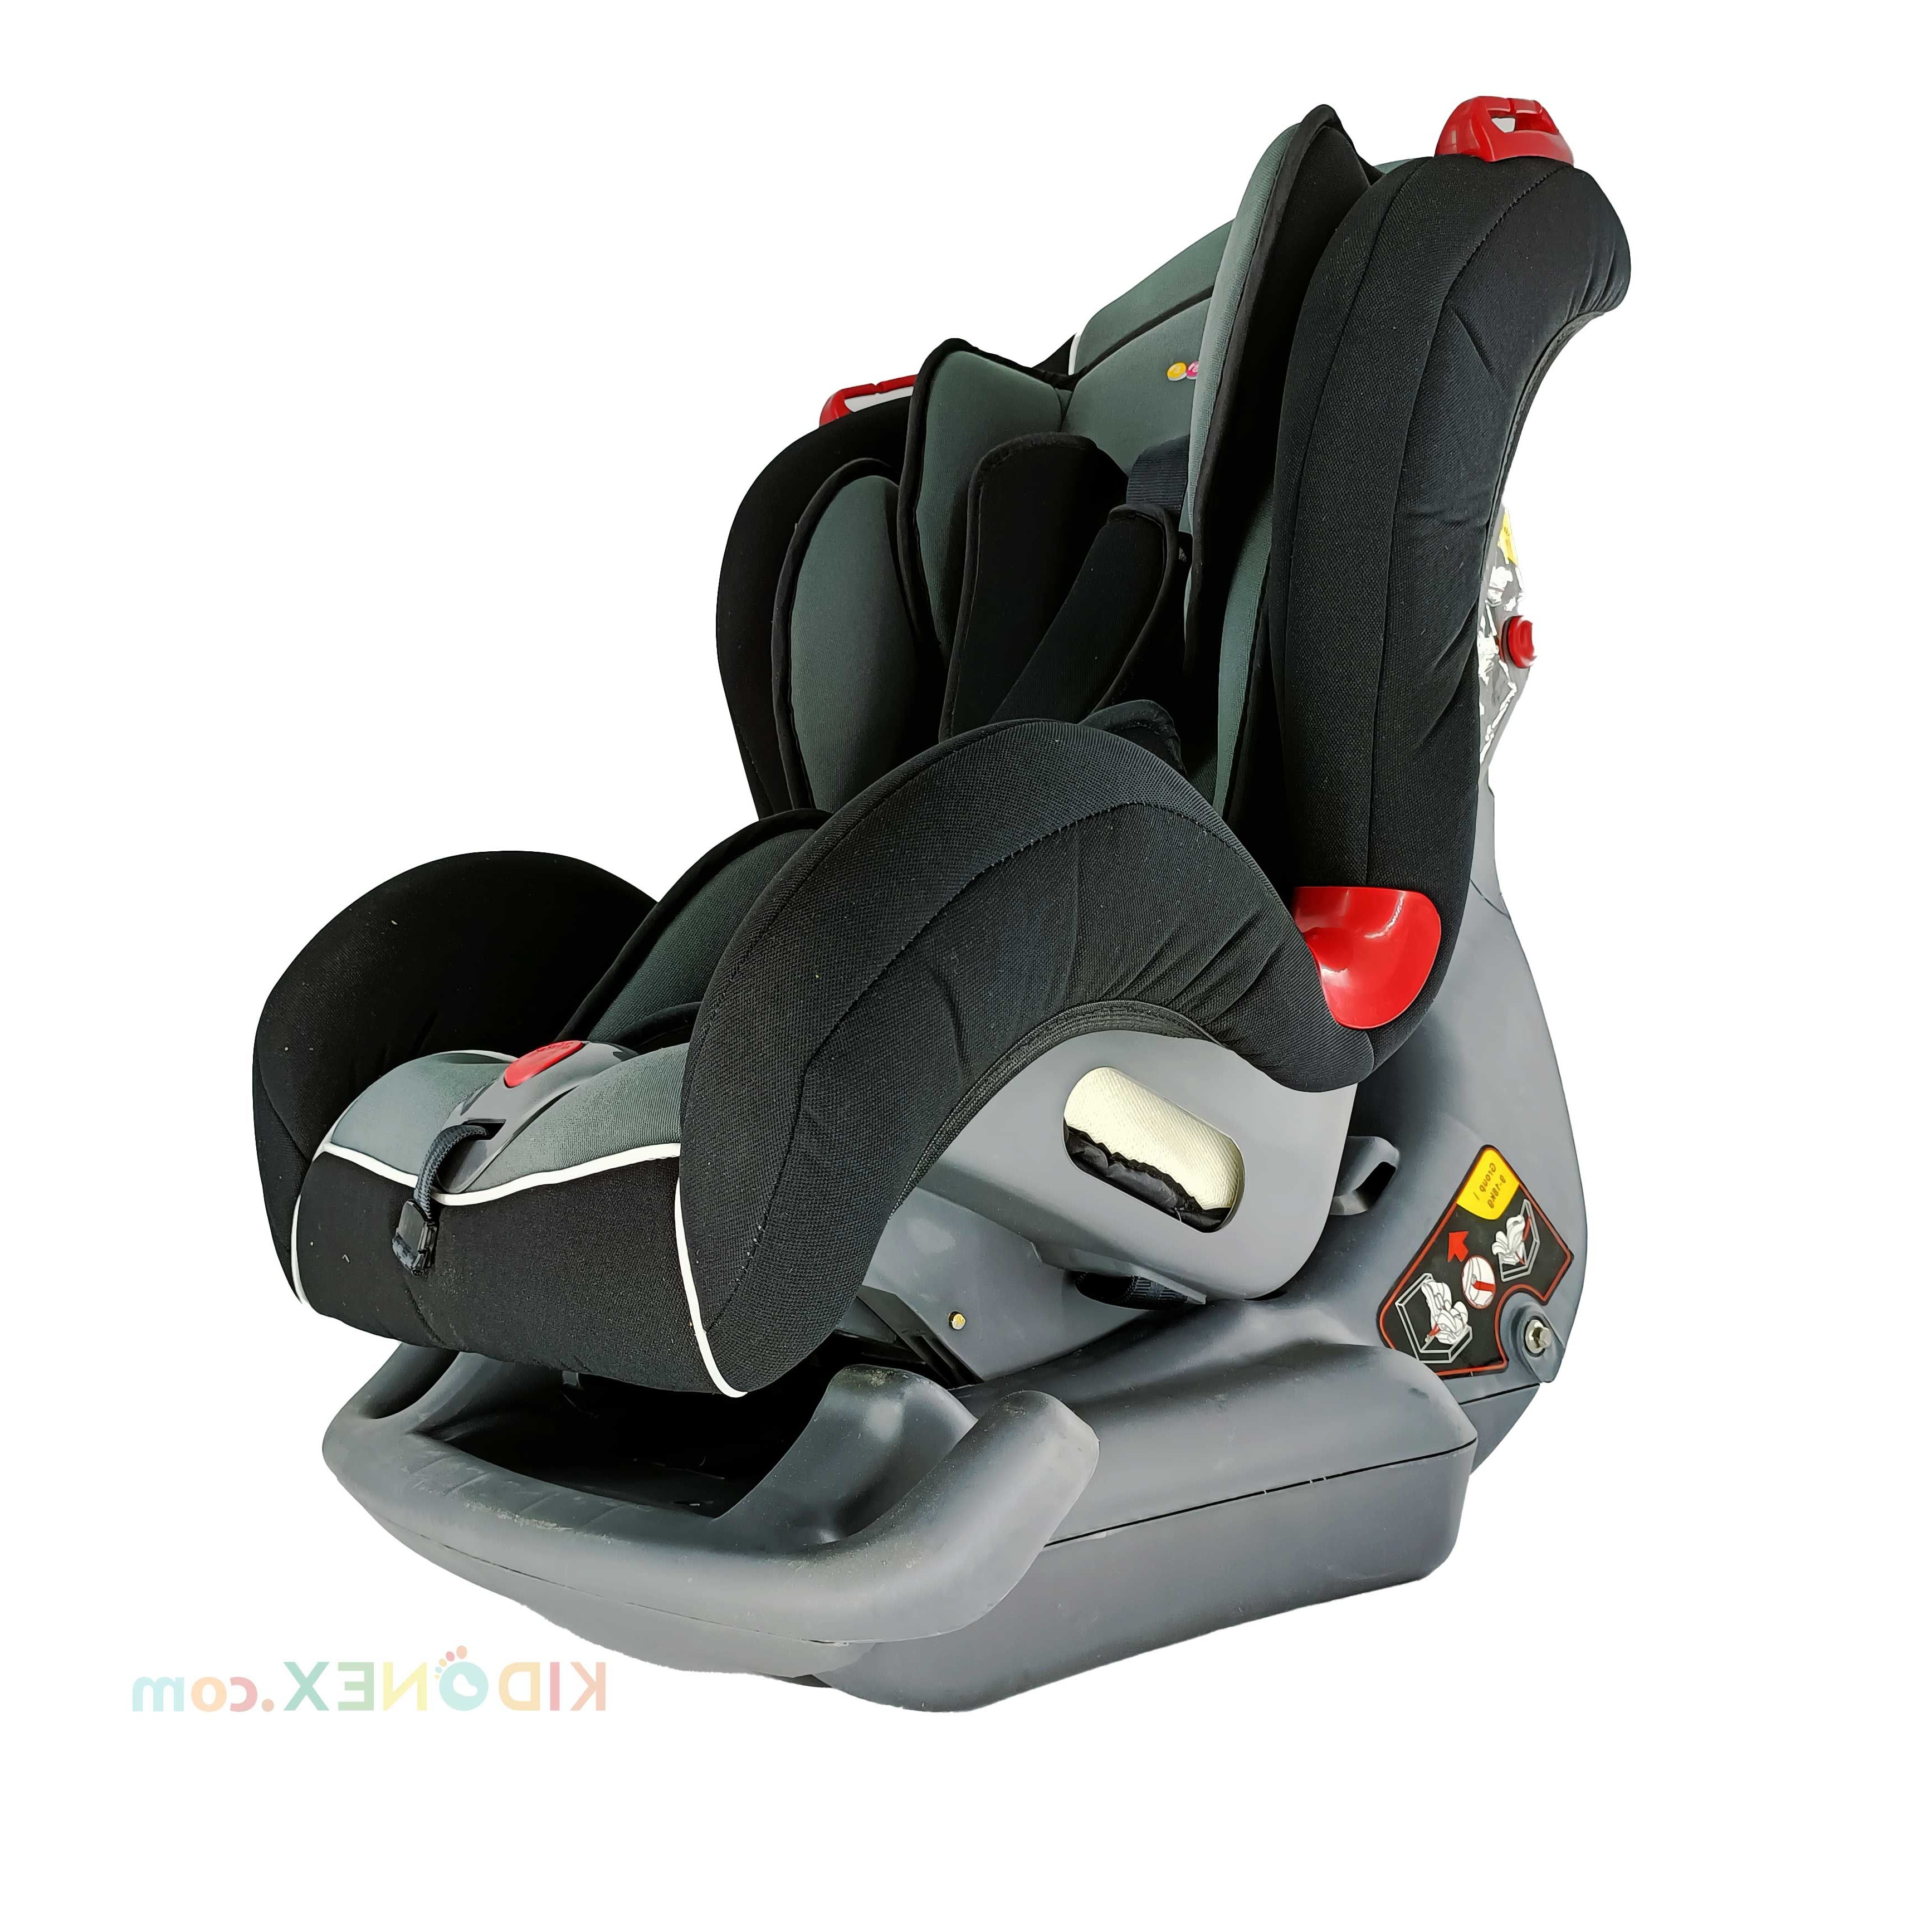 Car Seat for Kids of 0 to 5 Years Age (Black & Grey)